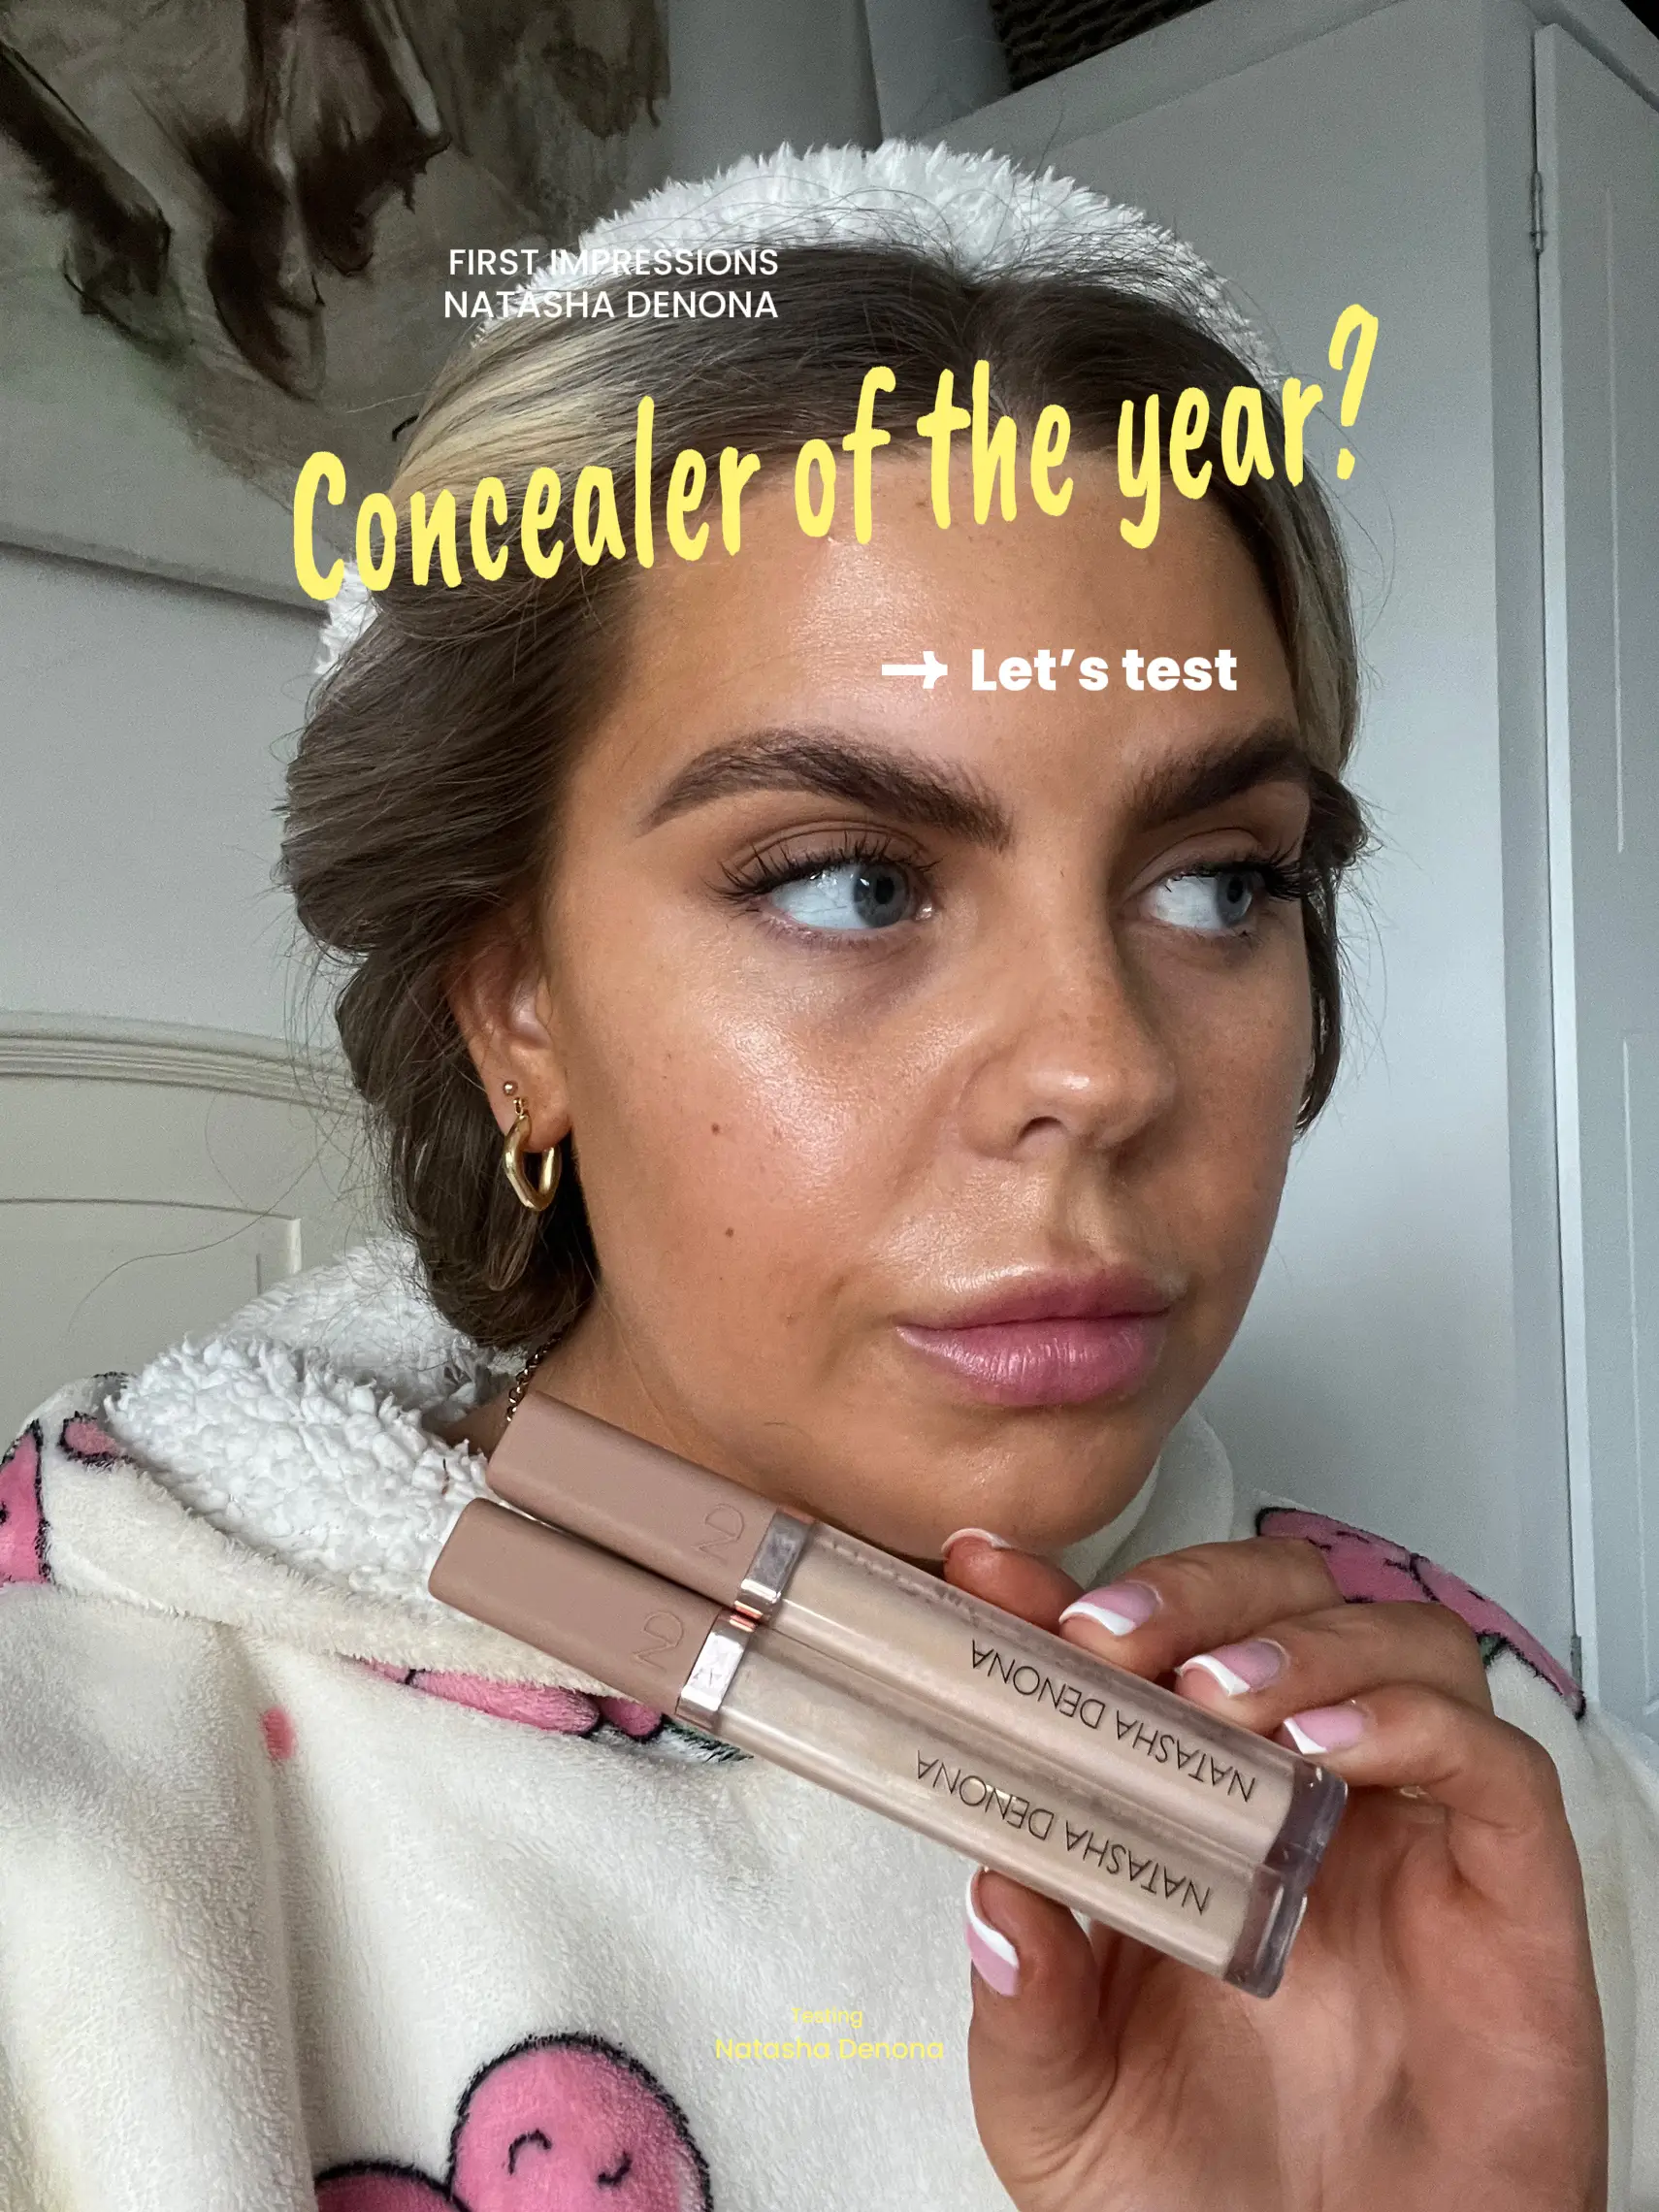 Is the Natasha Denona Hy-Glam Concealer really that good?